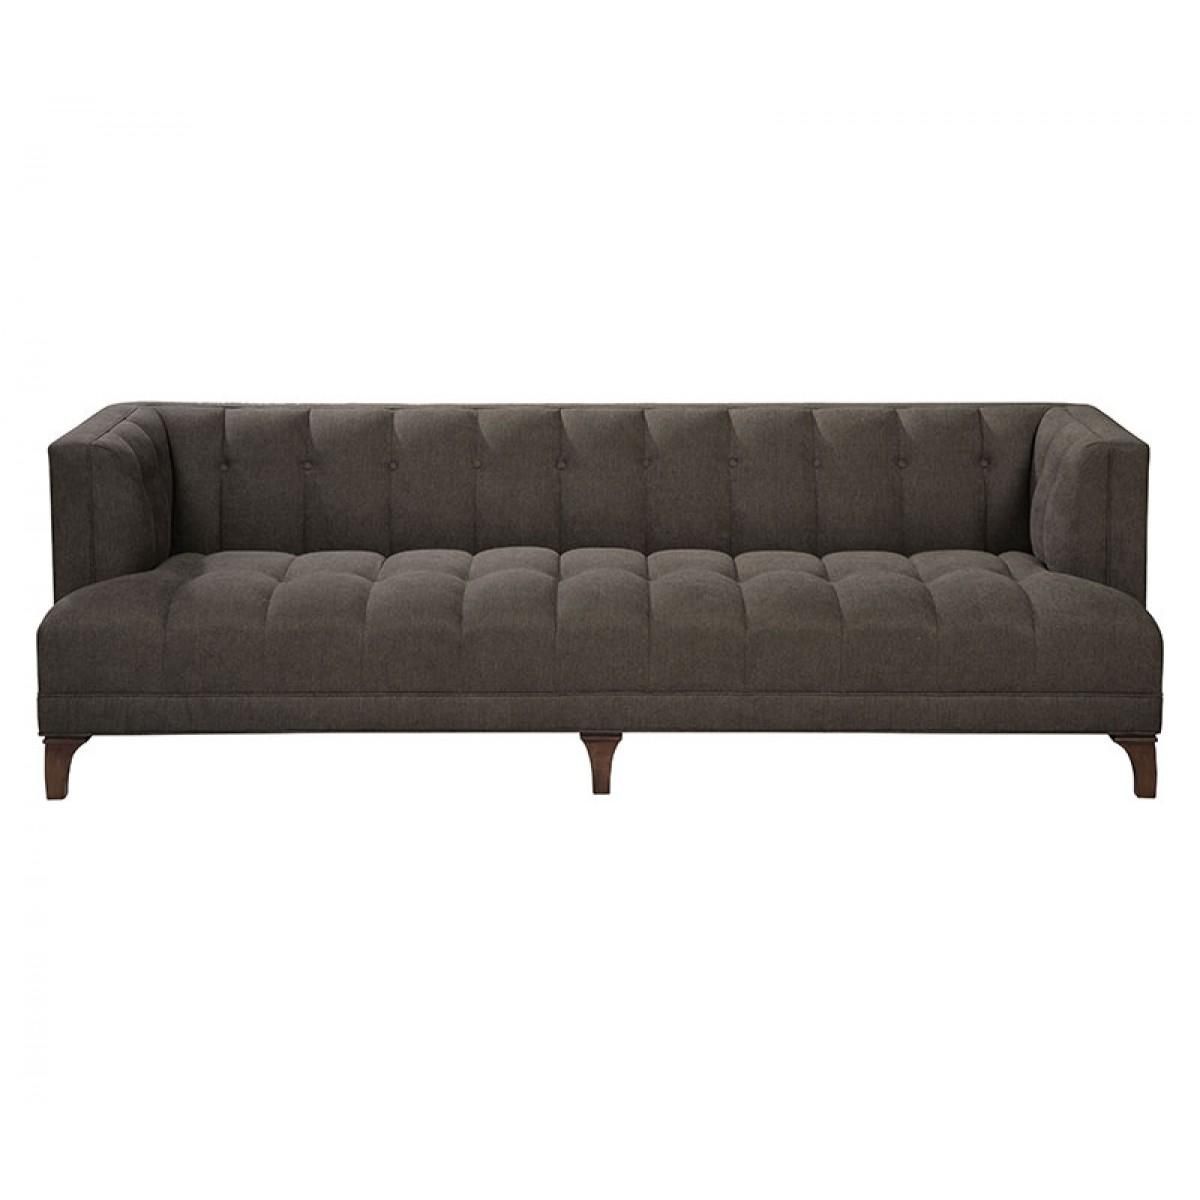 Shop Sofas, Couches & Loveseats Online – Boyles Furniture Regarding Thomasville Leather Sectionals (View 17 of 20)